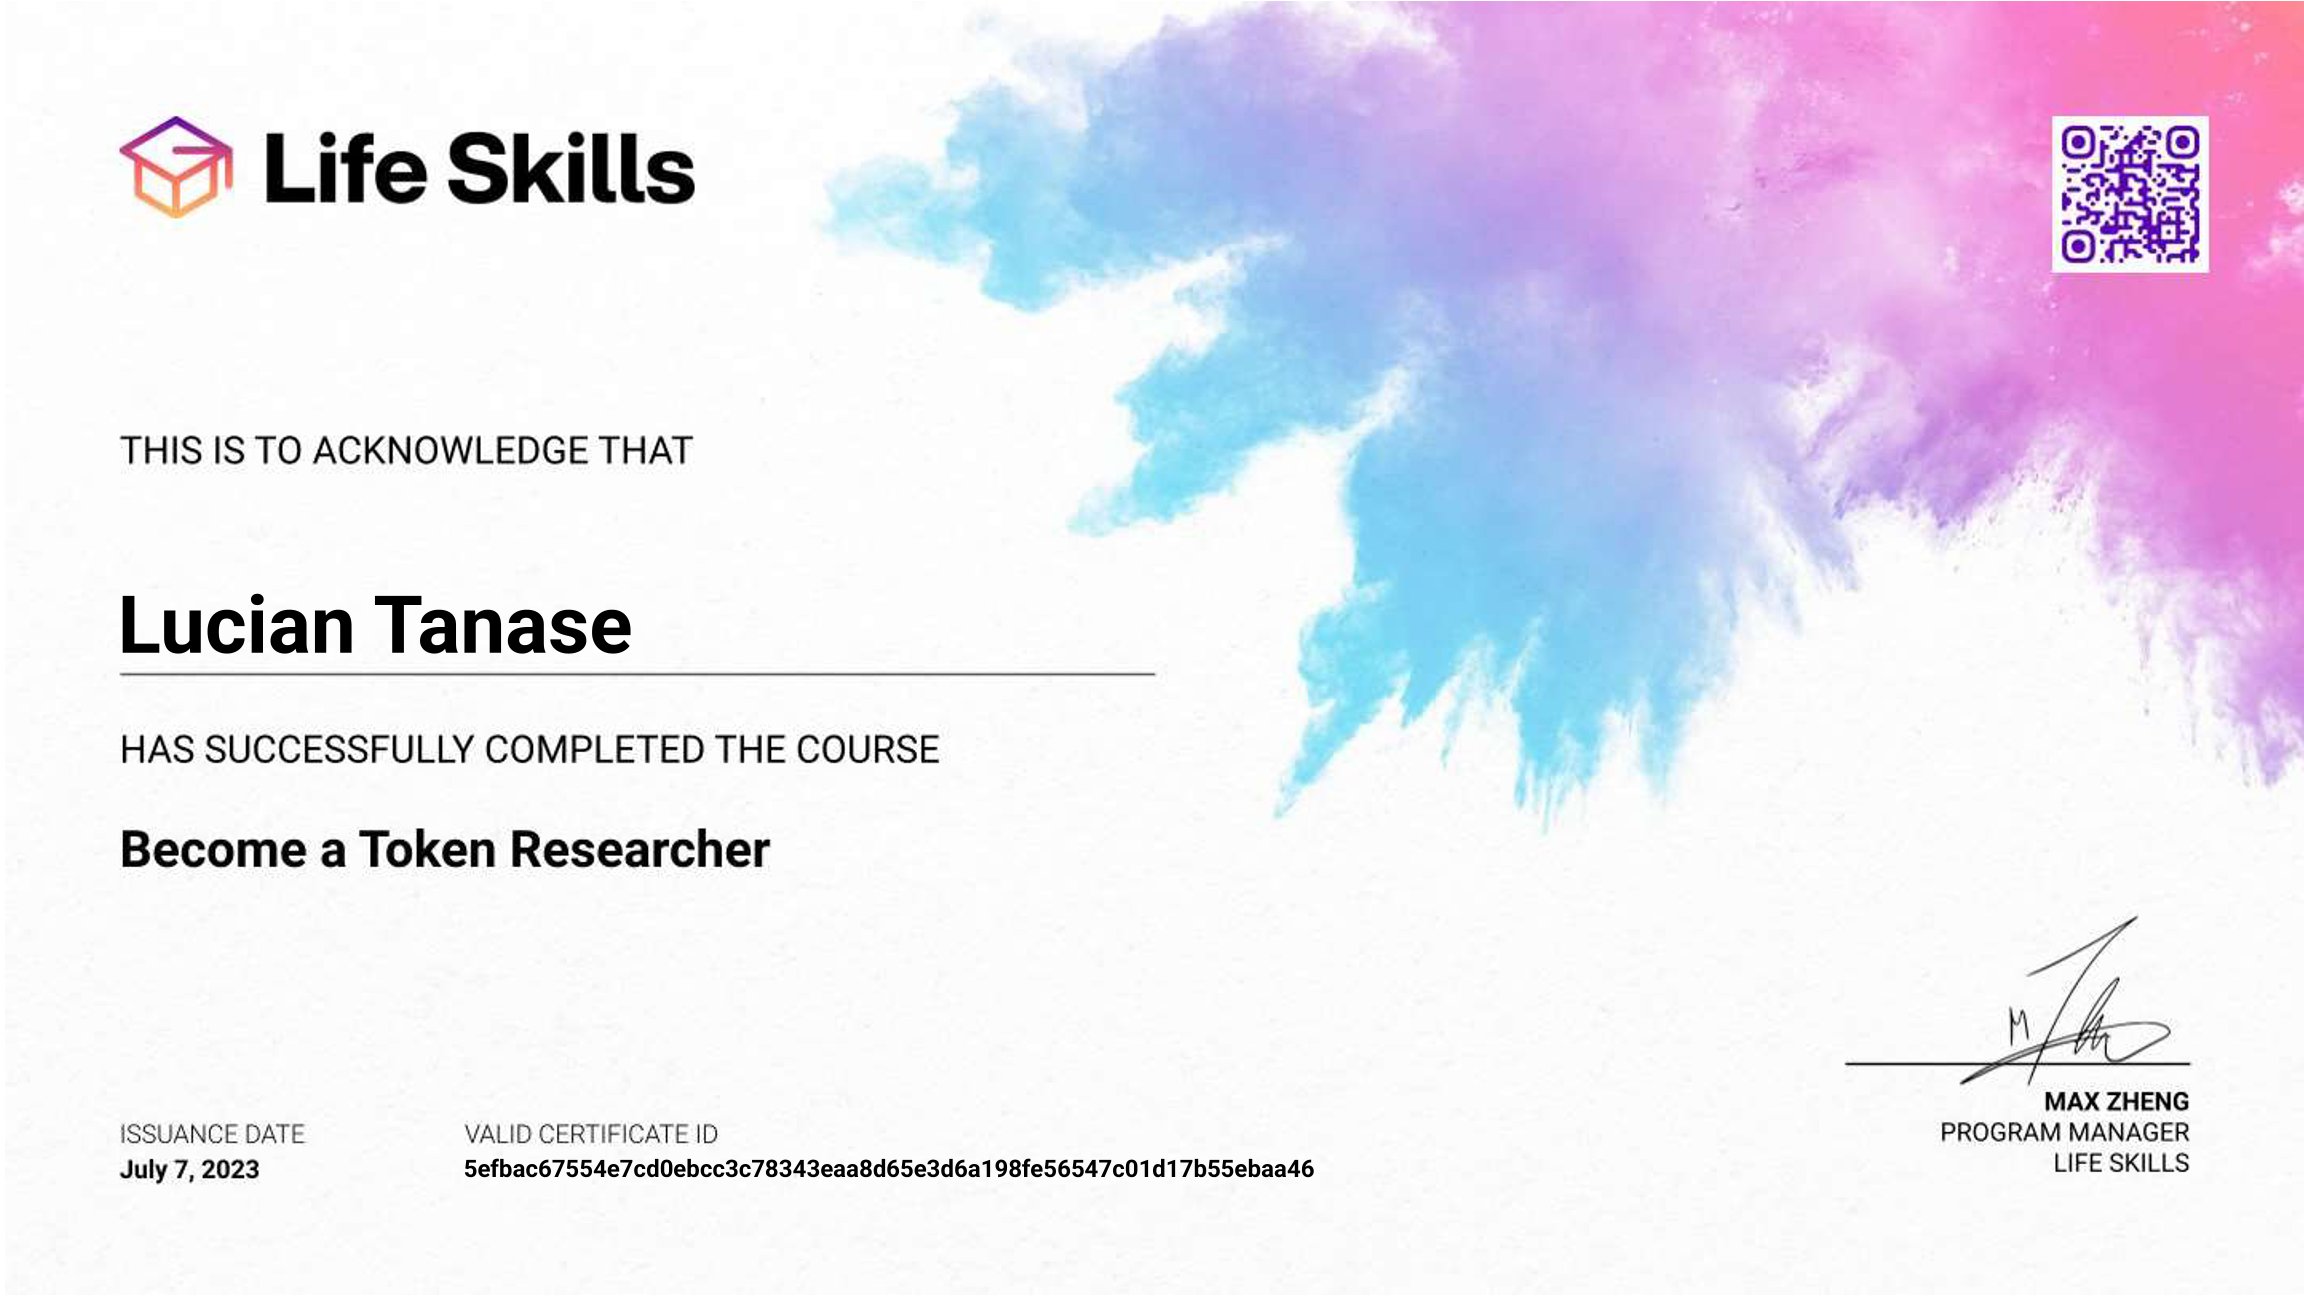 Life Skills - Become a Token Researcher - Lucian Tanase - Certificate